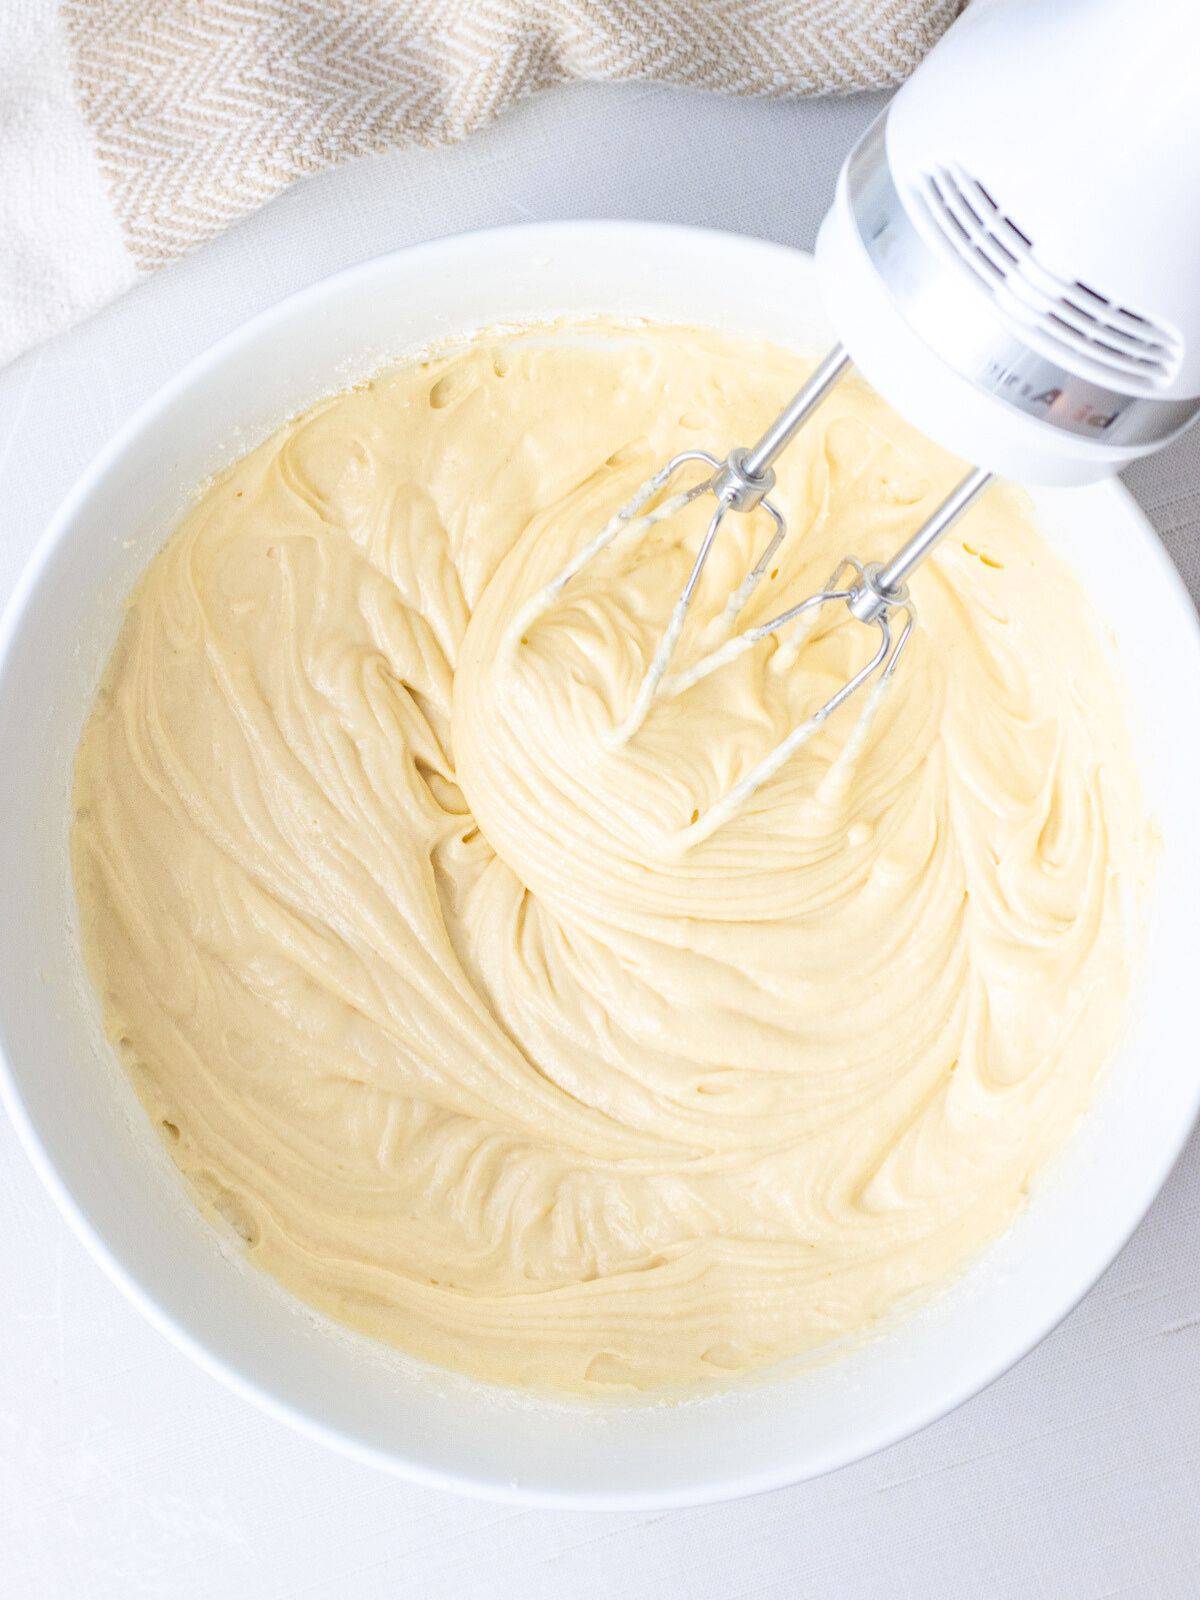 Coffee cake batter in a bowl with electric whisks.